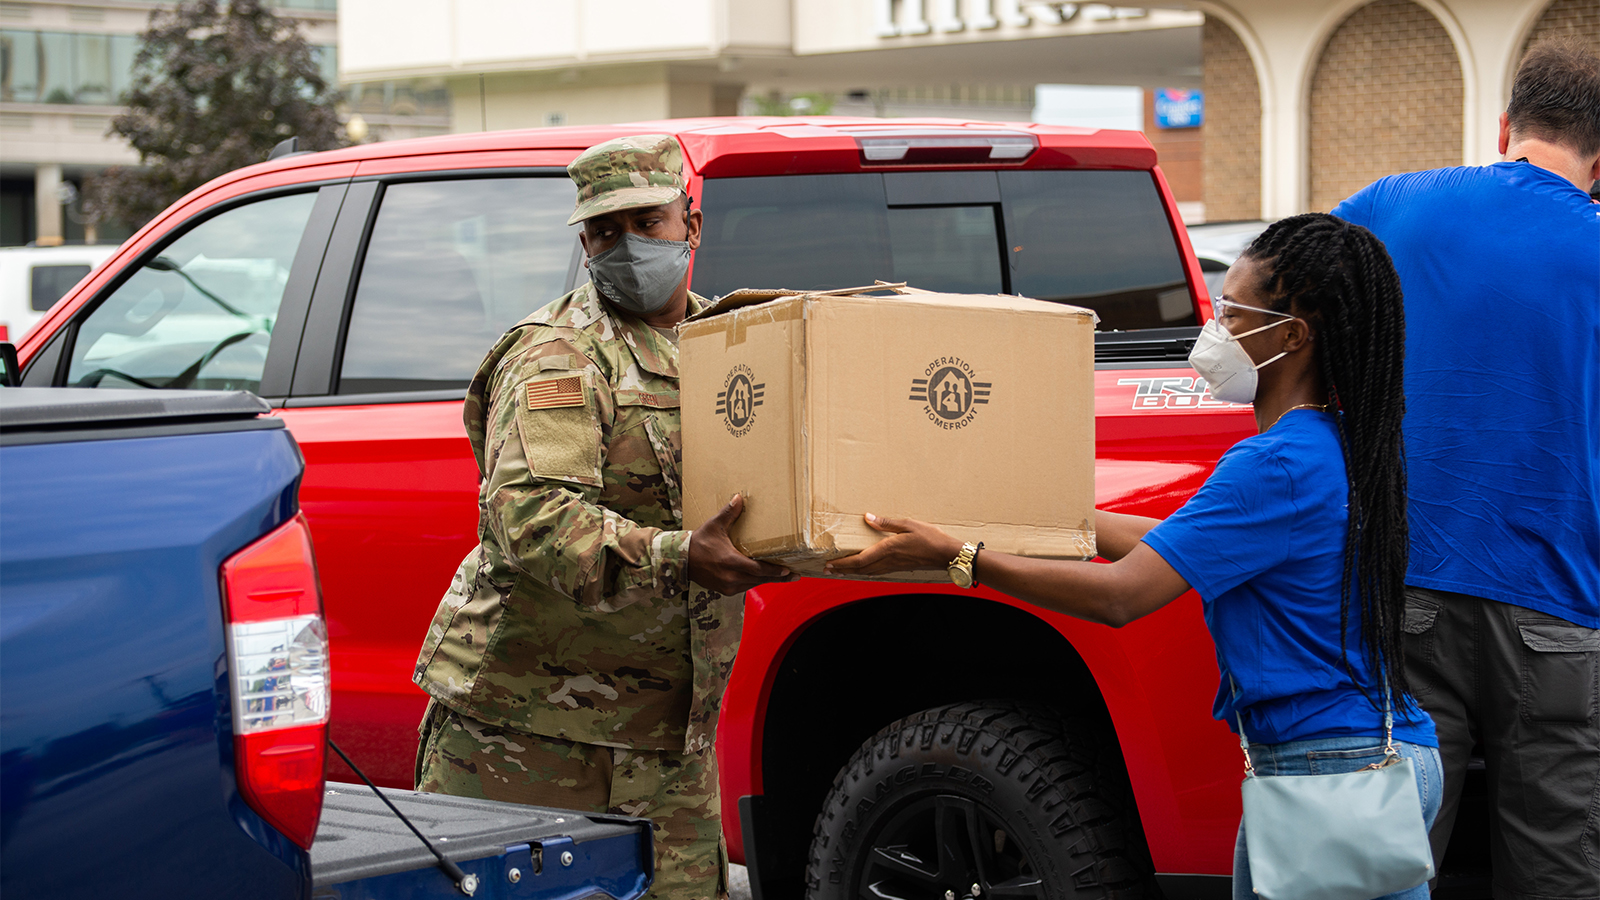 Service member is receiving a large box from a volunteer at an event.